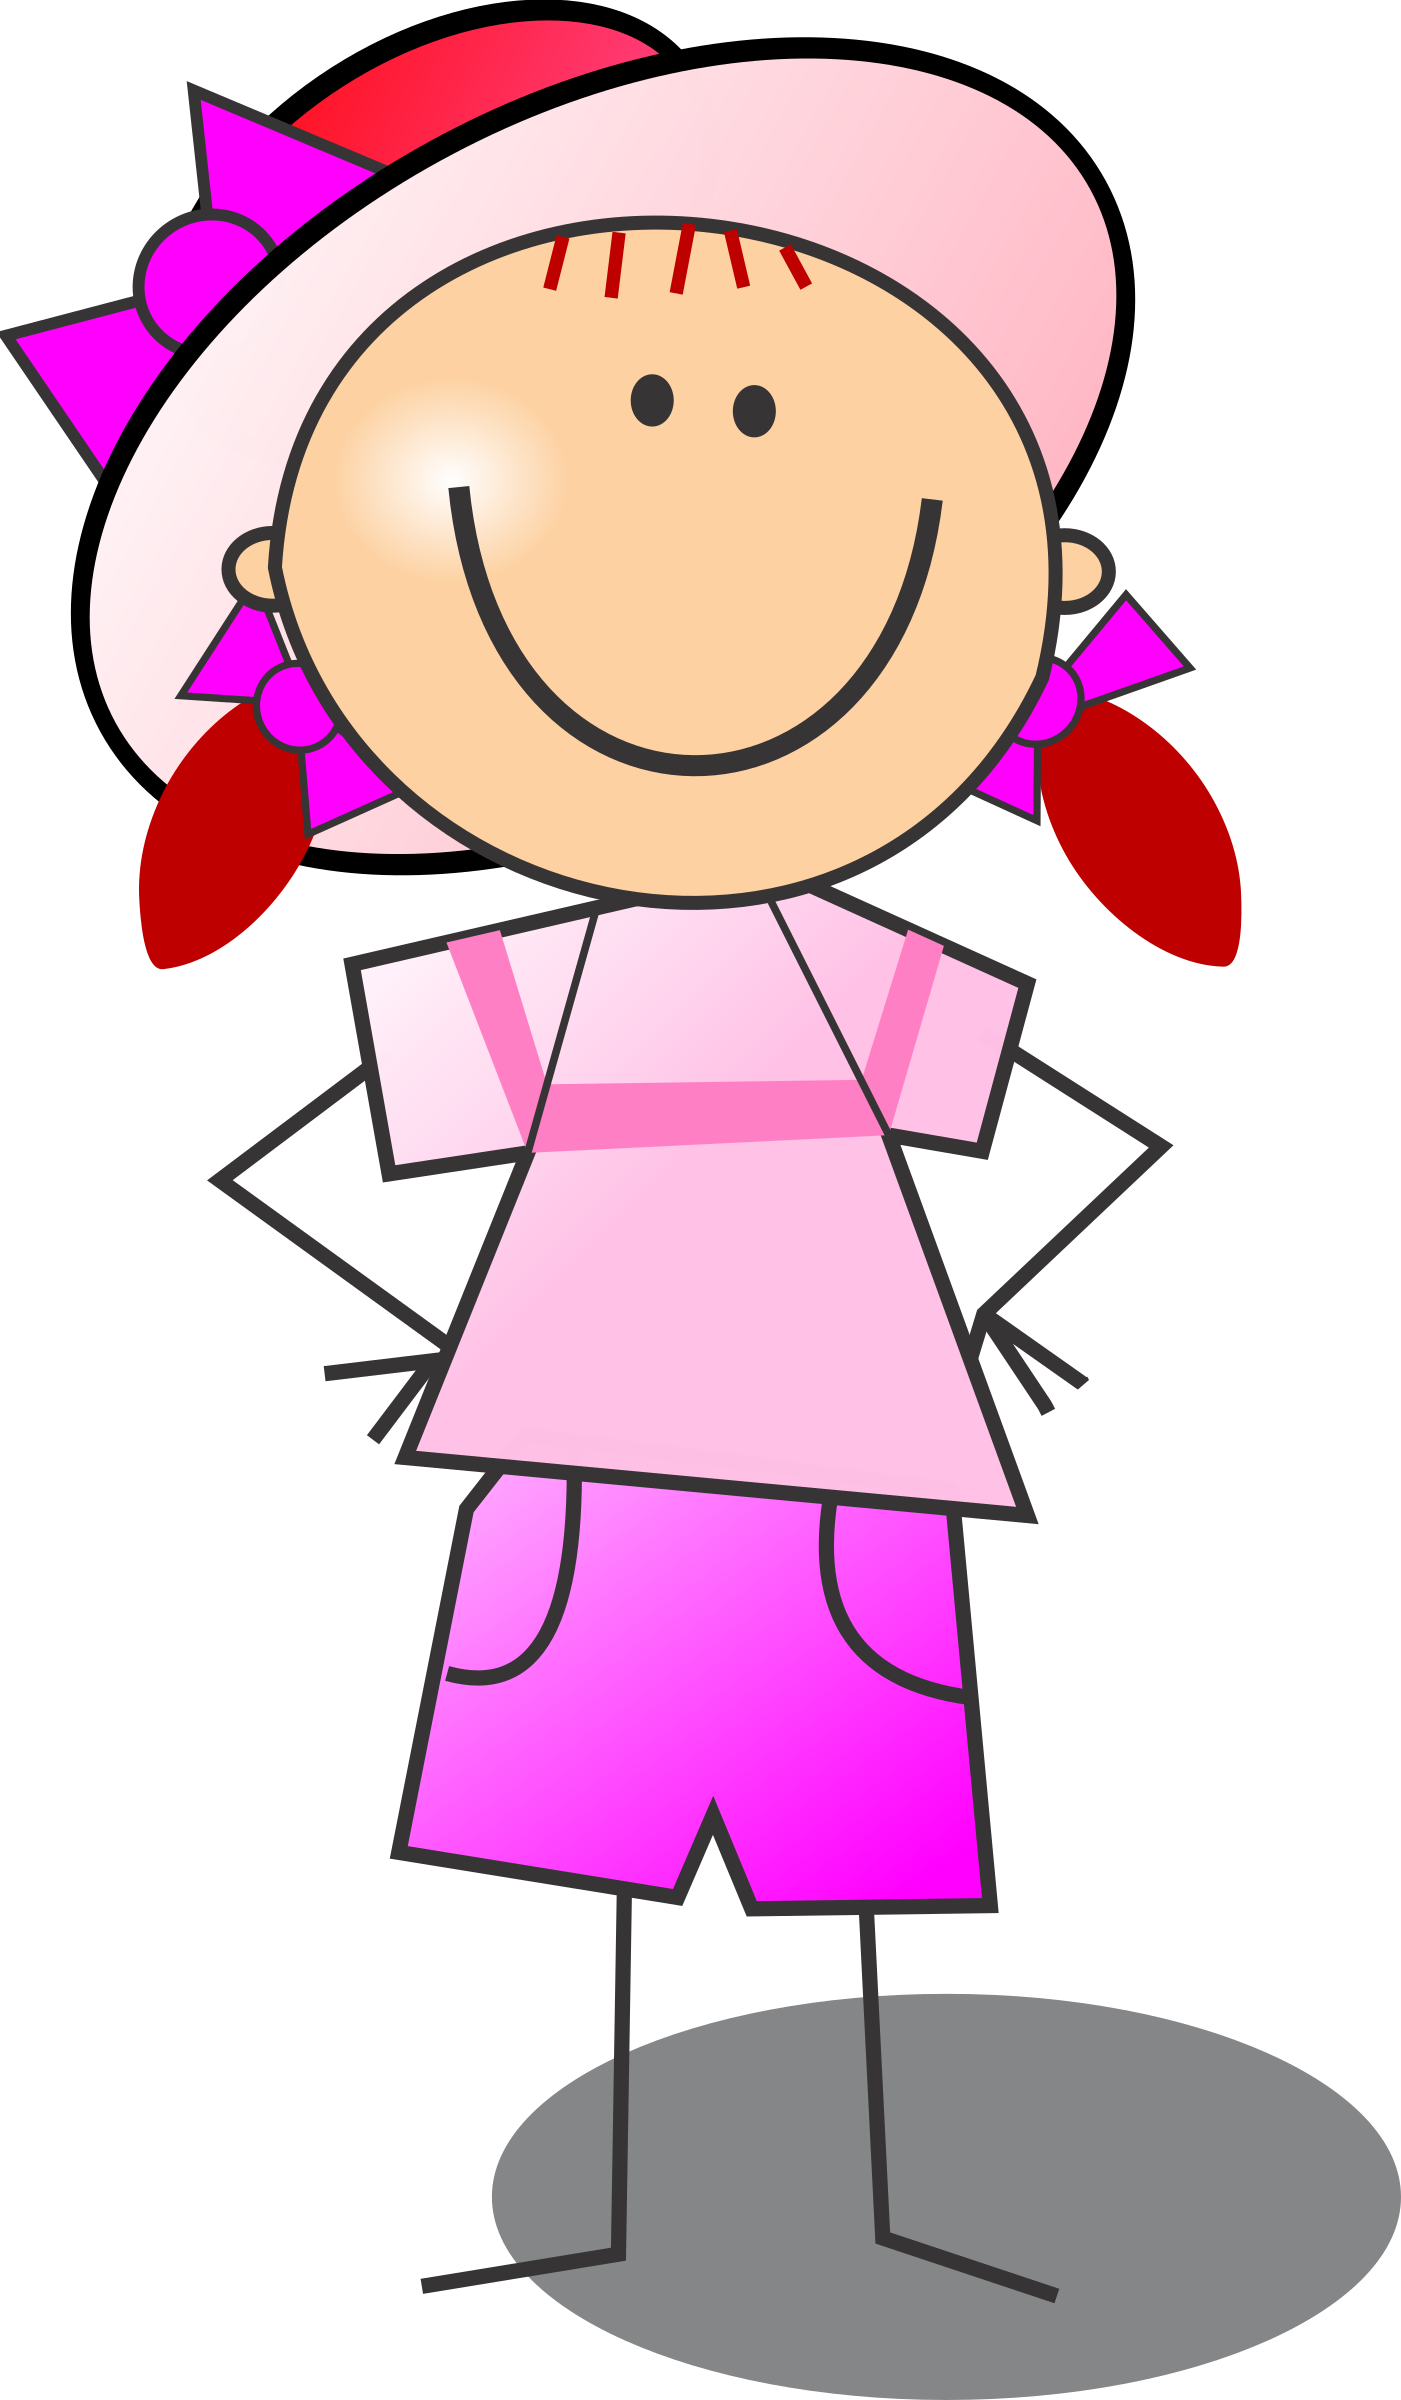 Stick girl drawing at. Girls clipart smile